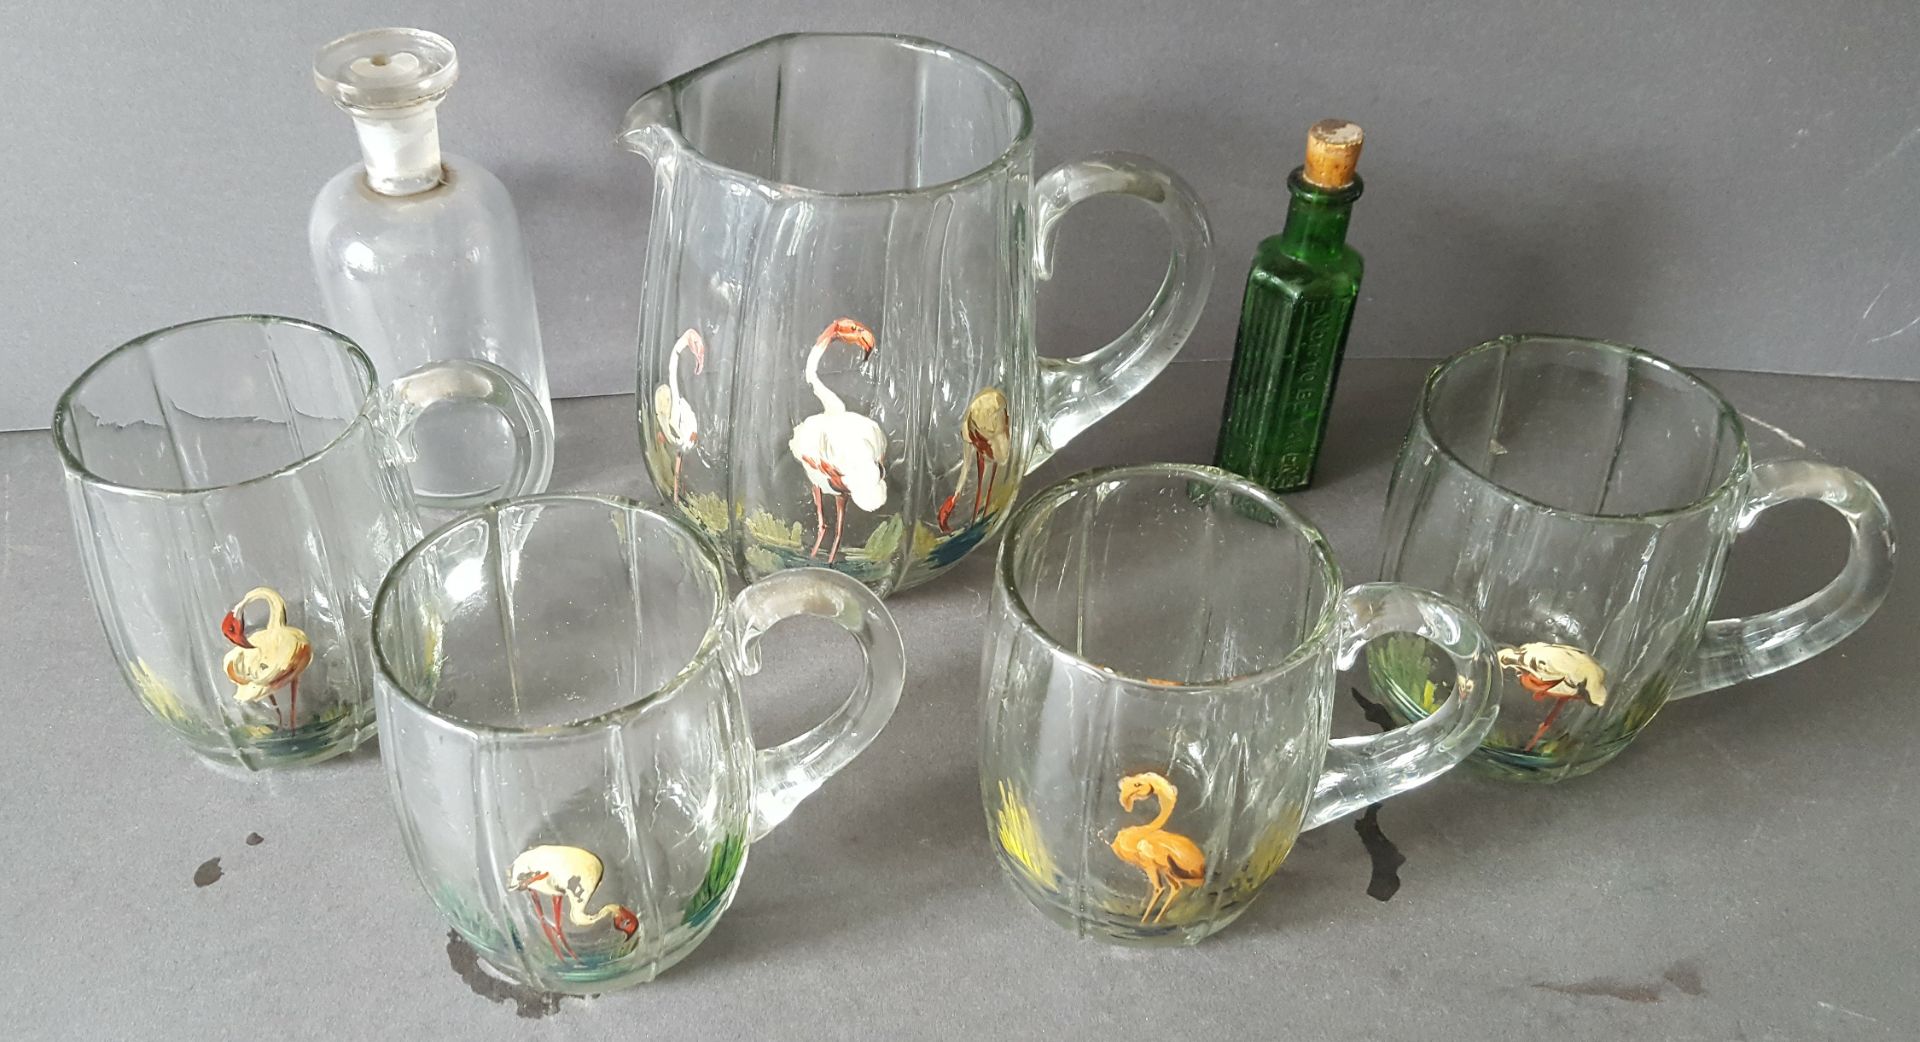 Antique Vintage Retro Hand Made & Hand Painted Jug & 4 Matching Glasses Plus 2 Collectable Bottles